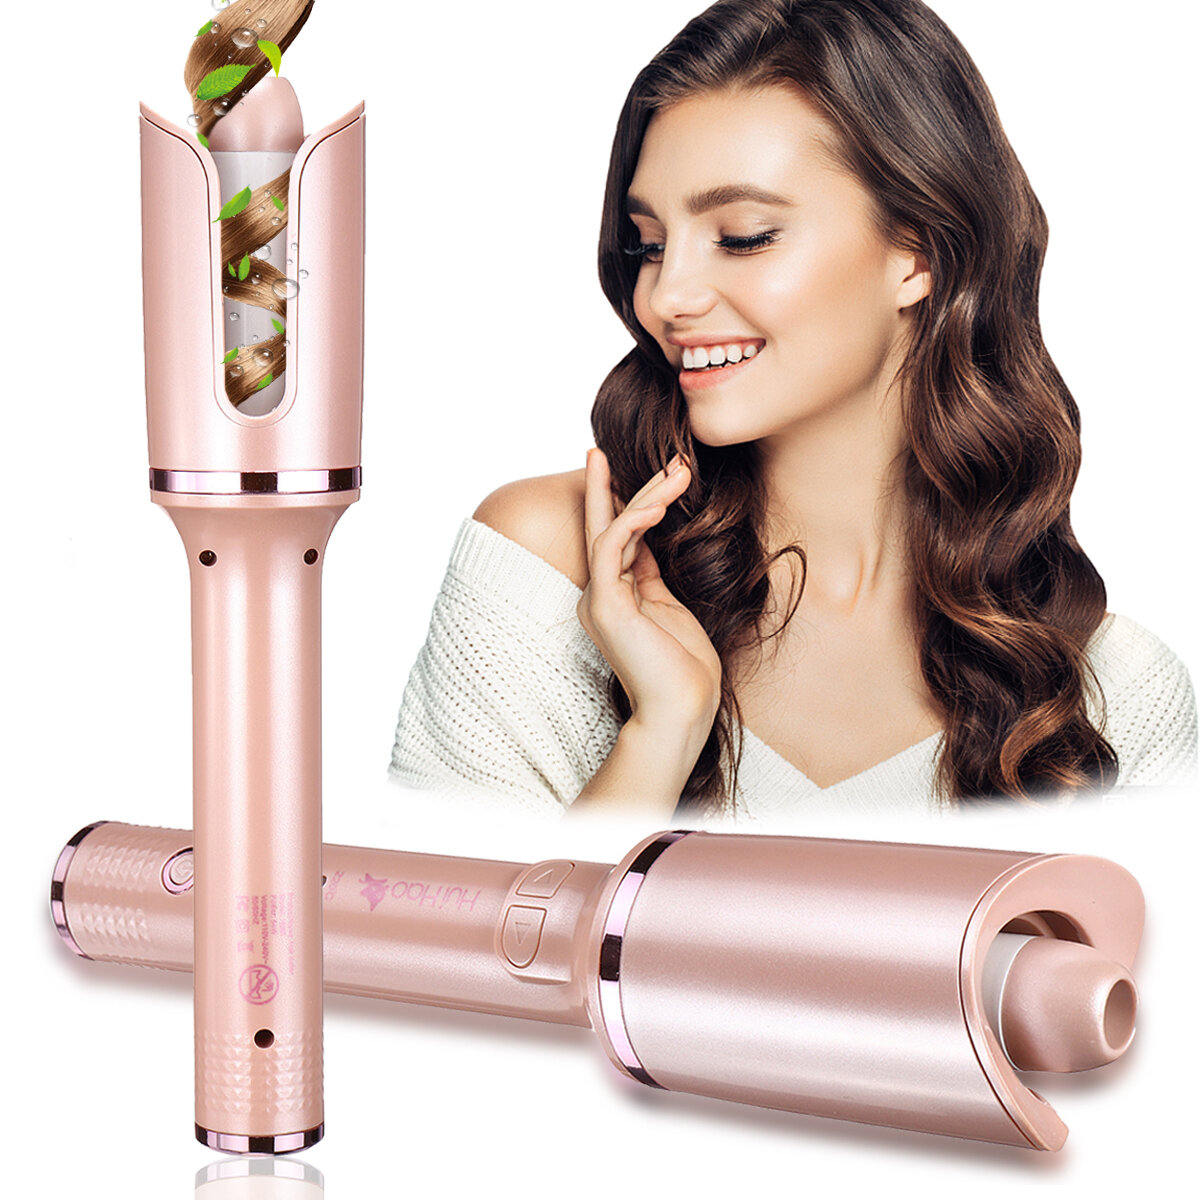 Fully Automatic Spiral Electric Rotating Curling Iron Temperature Digital Display Hair Curler Muti-s